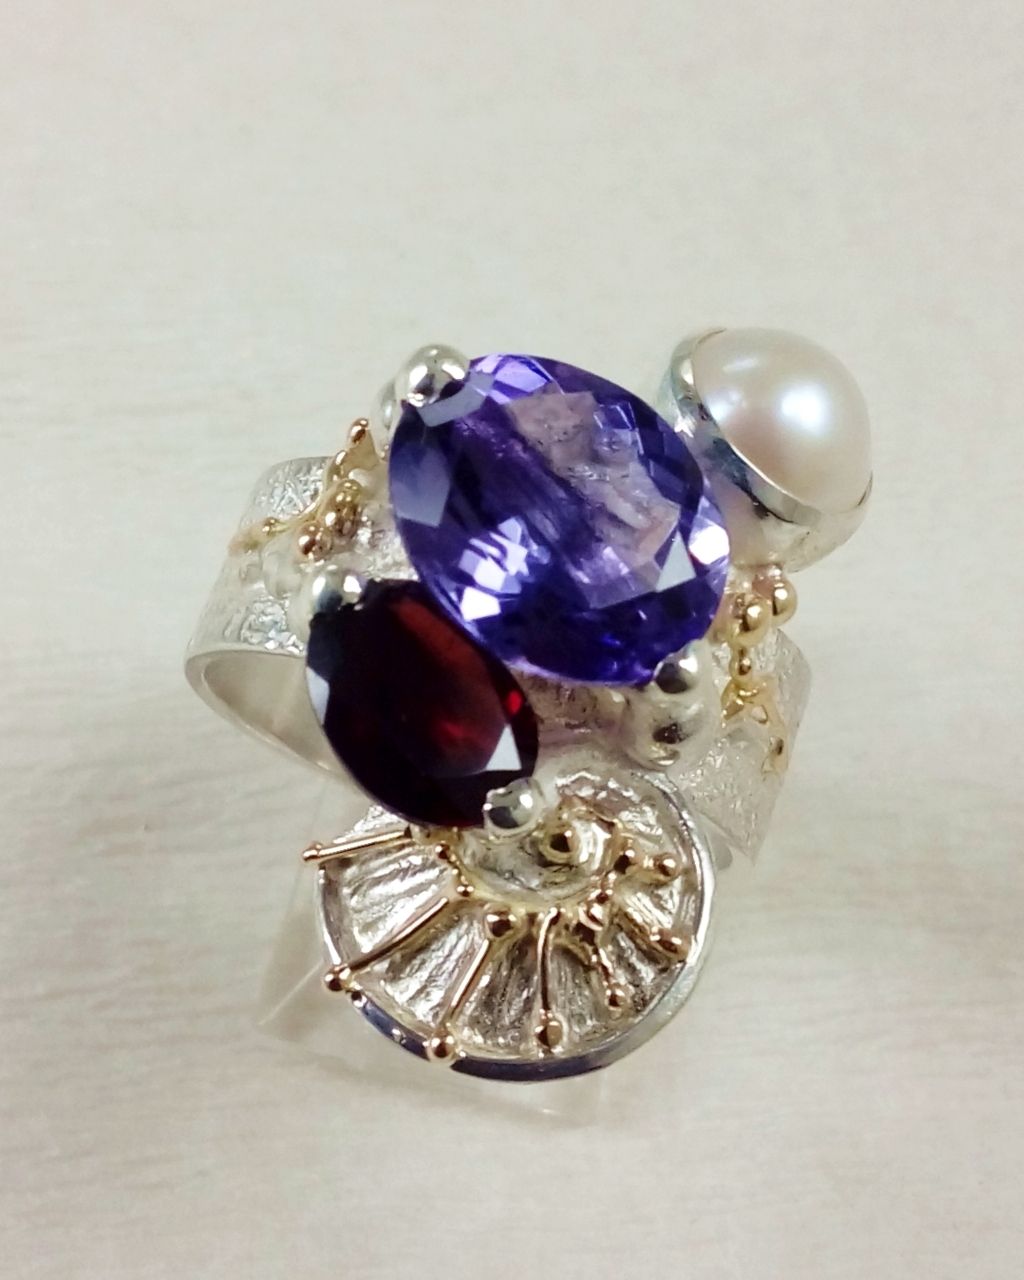 Gregory Pyra Piro ring 3035, Gregory Pyra Piro art jewellery, art nouveau inspired art, one of a kind jewellery with amethyst and garnet, handcrafted jewellery with gemstones and pearls, who still makes one of a kind jewelry, jewellery sold in art galleries, jewellery sold in craft galleries, mixed metal jewellery with gemstones and pearls, artists during lockdown, where do I find still active vintage jewelry artists, how do I find vinatage designers and artists that are still active, where tojewelry with retro style for my grandmotherjewellery online, where to find vintage jewelry artist that is still active, where to find fine craft product styles from the 80s and 90s, buy fine craft online, rings made during lockdown